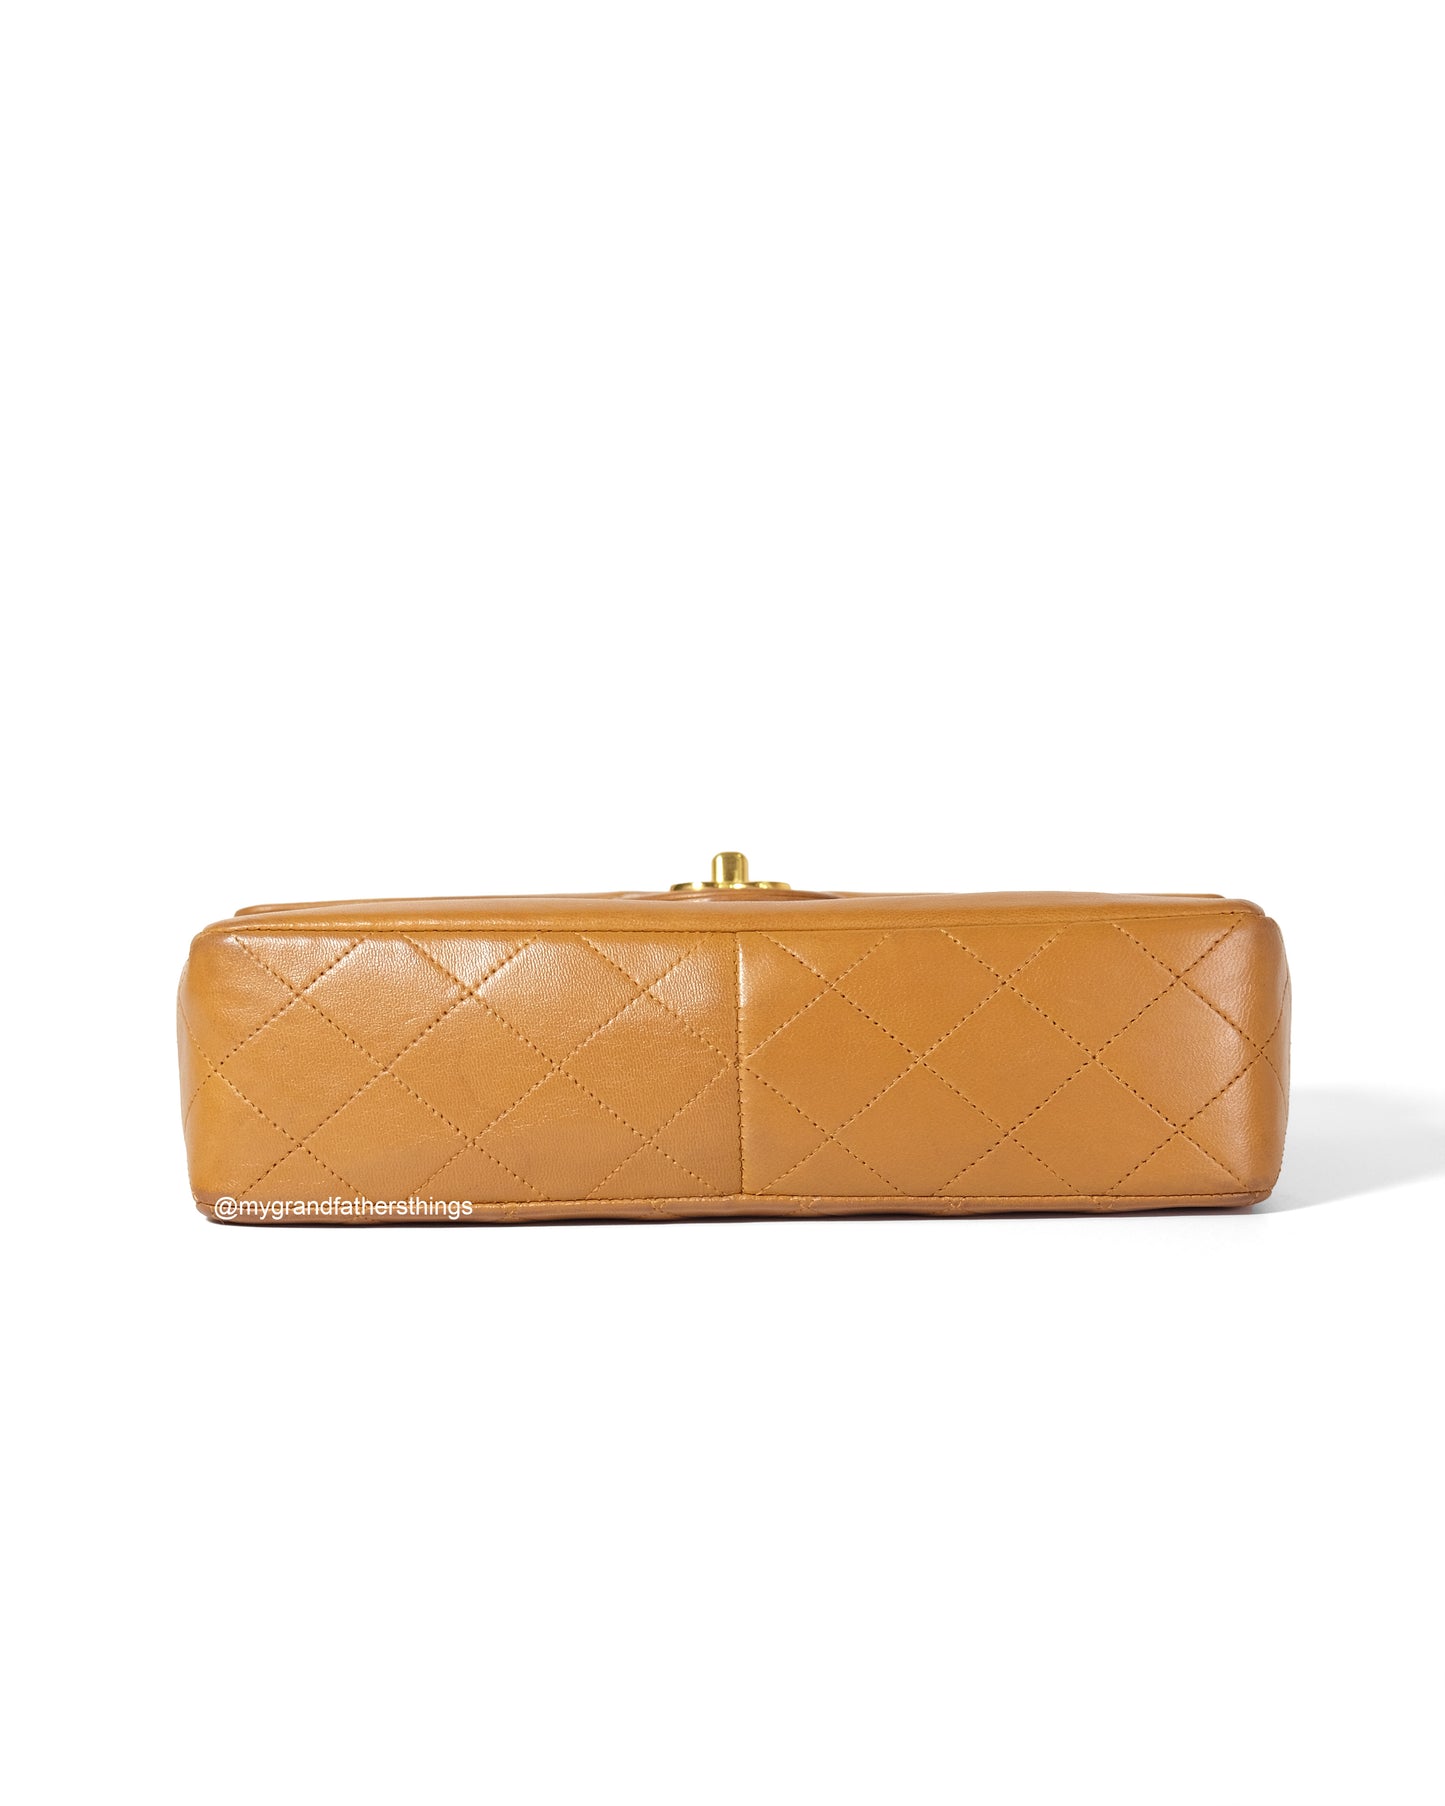 Halvard, 1 series horizon caramel flap with serial and wallet only - My Grandfather's Things